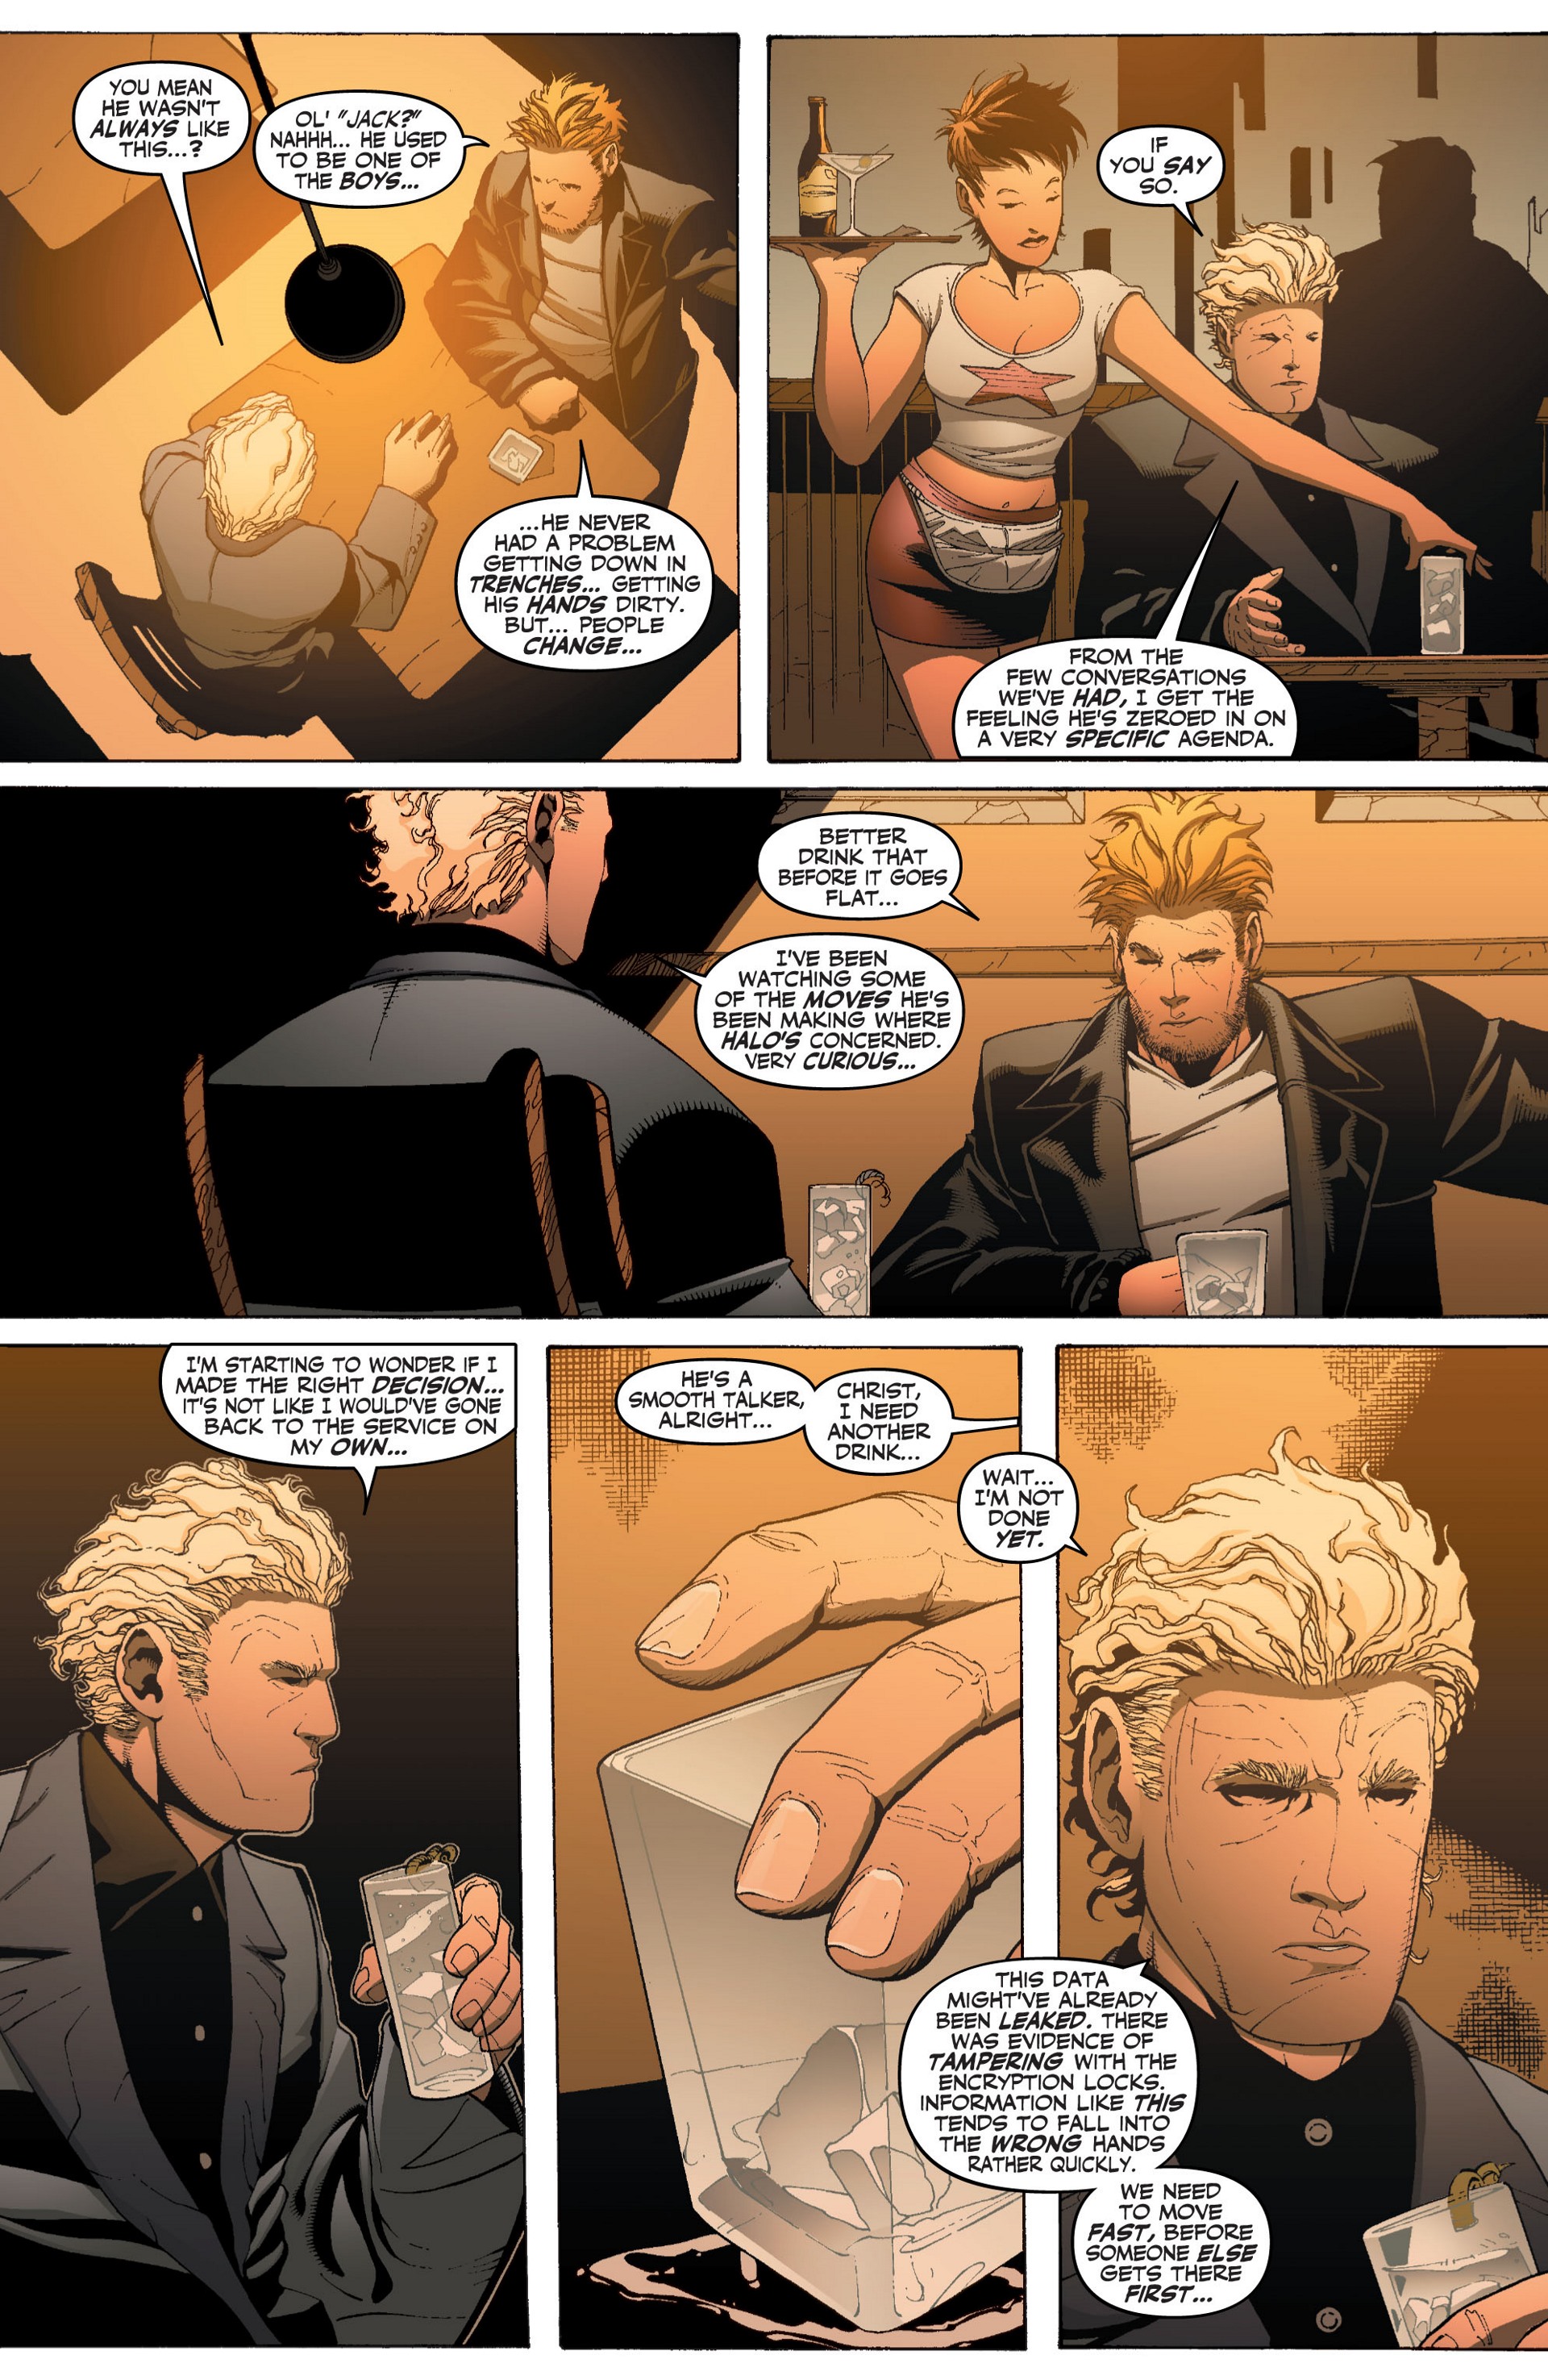 Wildcats Version 3.0 Issue #1 #1 - English 28